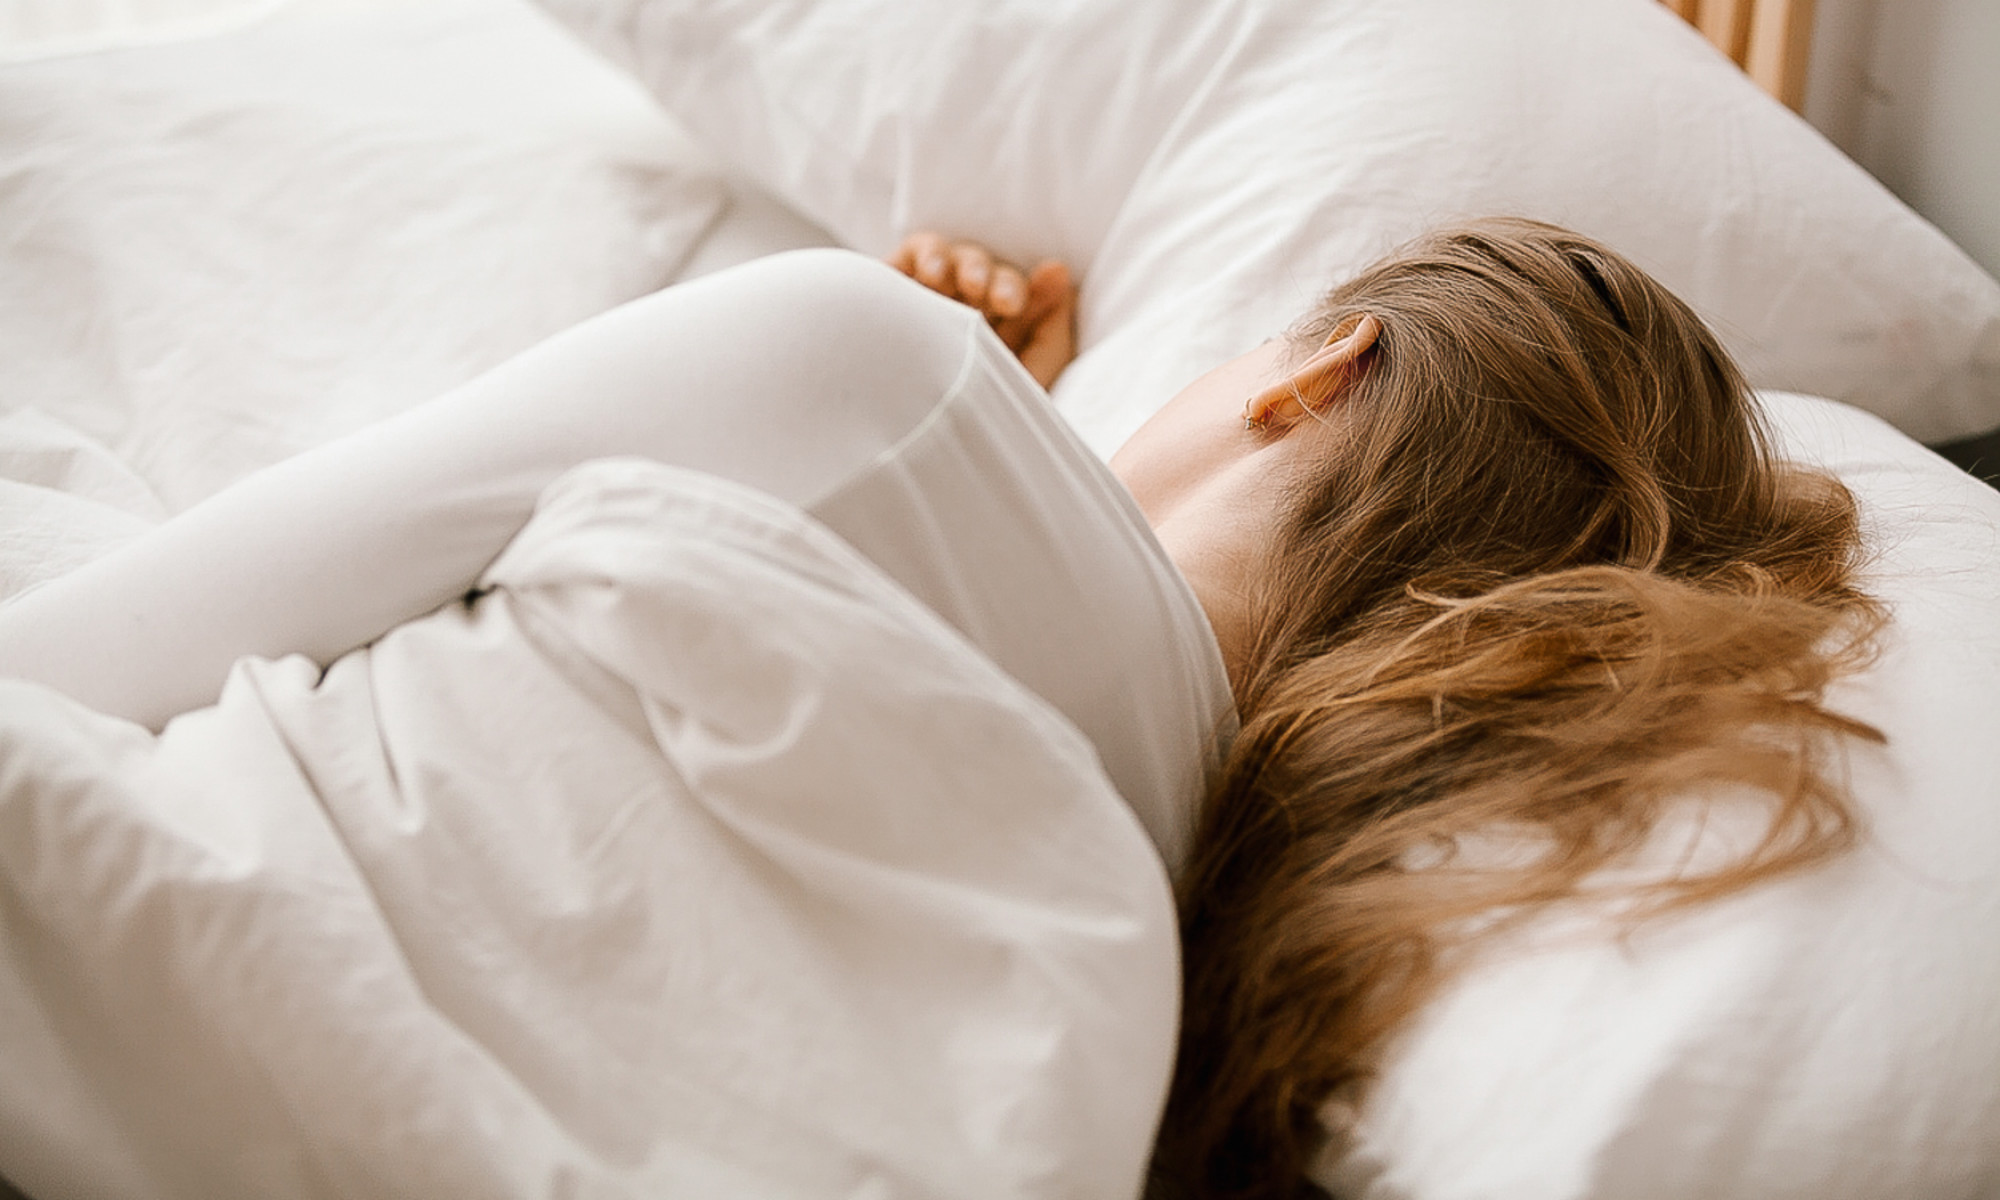 This Little-Known Supplement Helps Women Sleep & Decreases Signs Of Depression